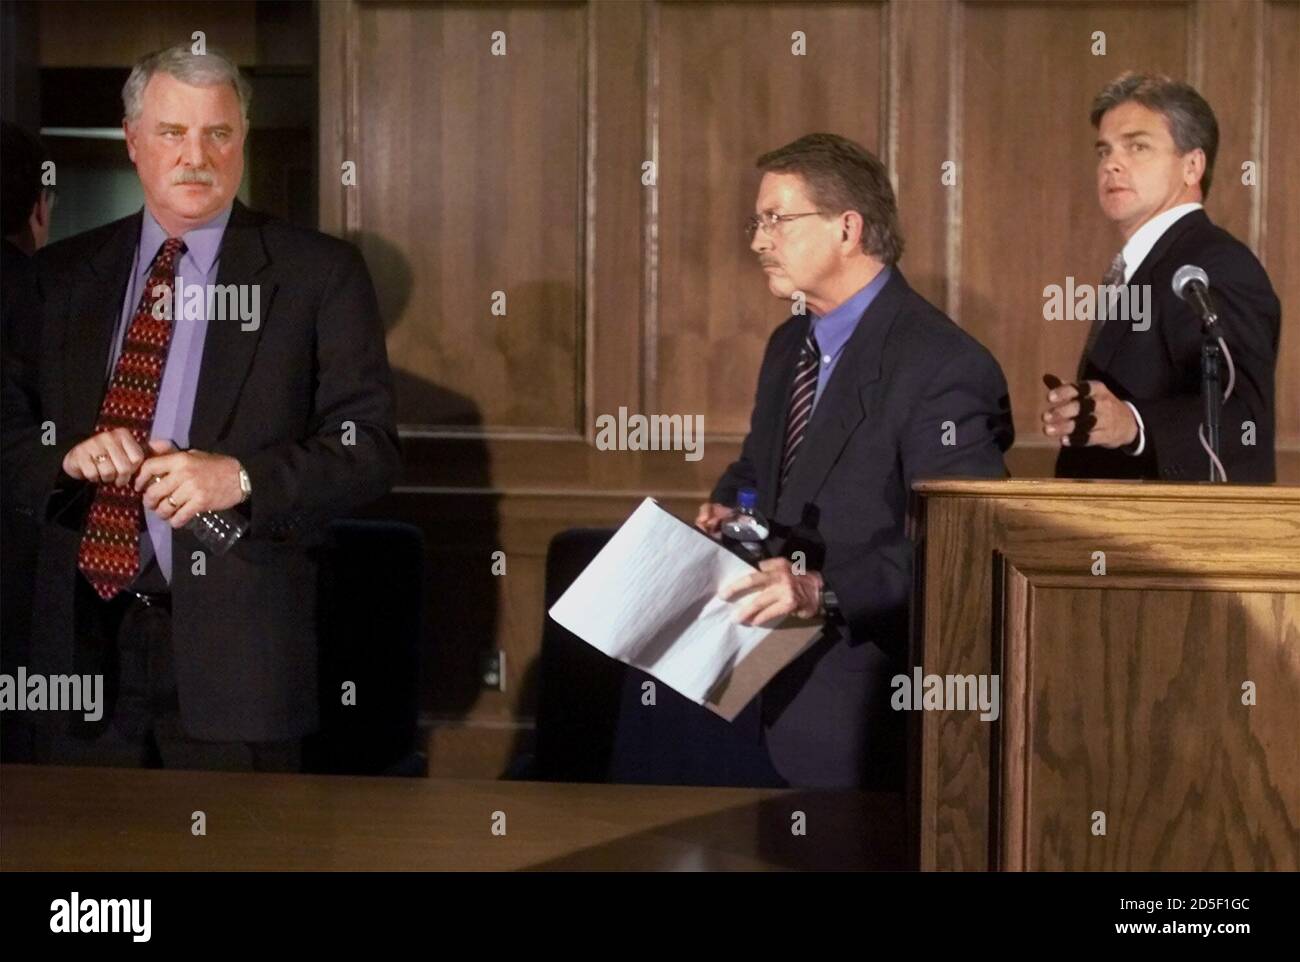 Boulder County District Attorney Alex Hunter (C) leaves a press conference  with Adams County District Attorney Bob Grant (L) and special prosecutor  Michael Morrissey after they spoke about the JonBenet Ramsey case